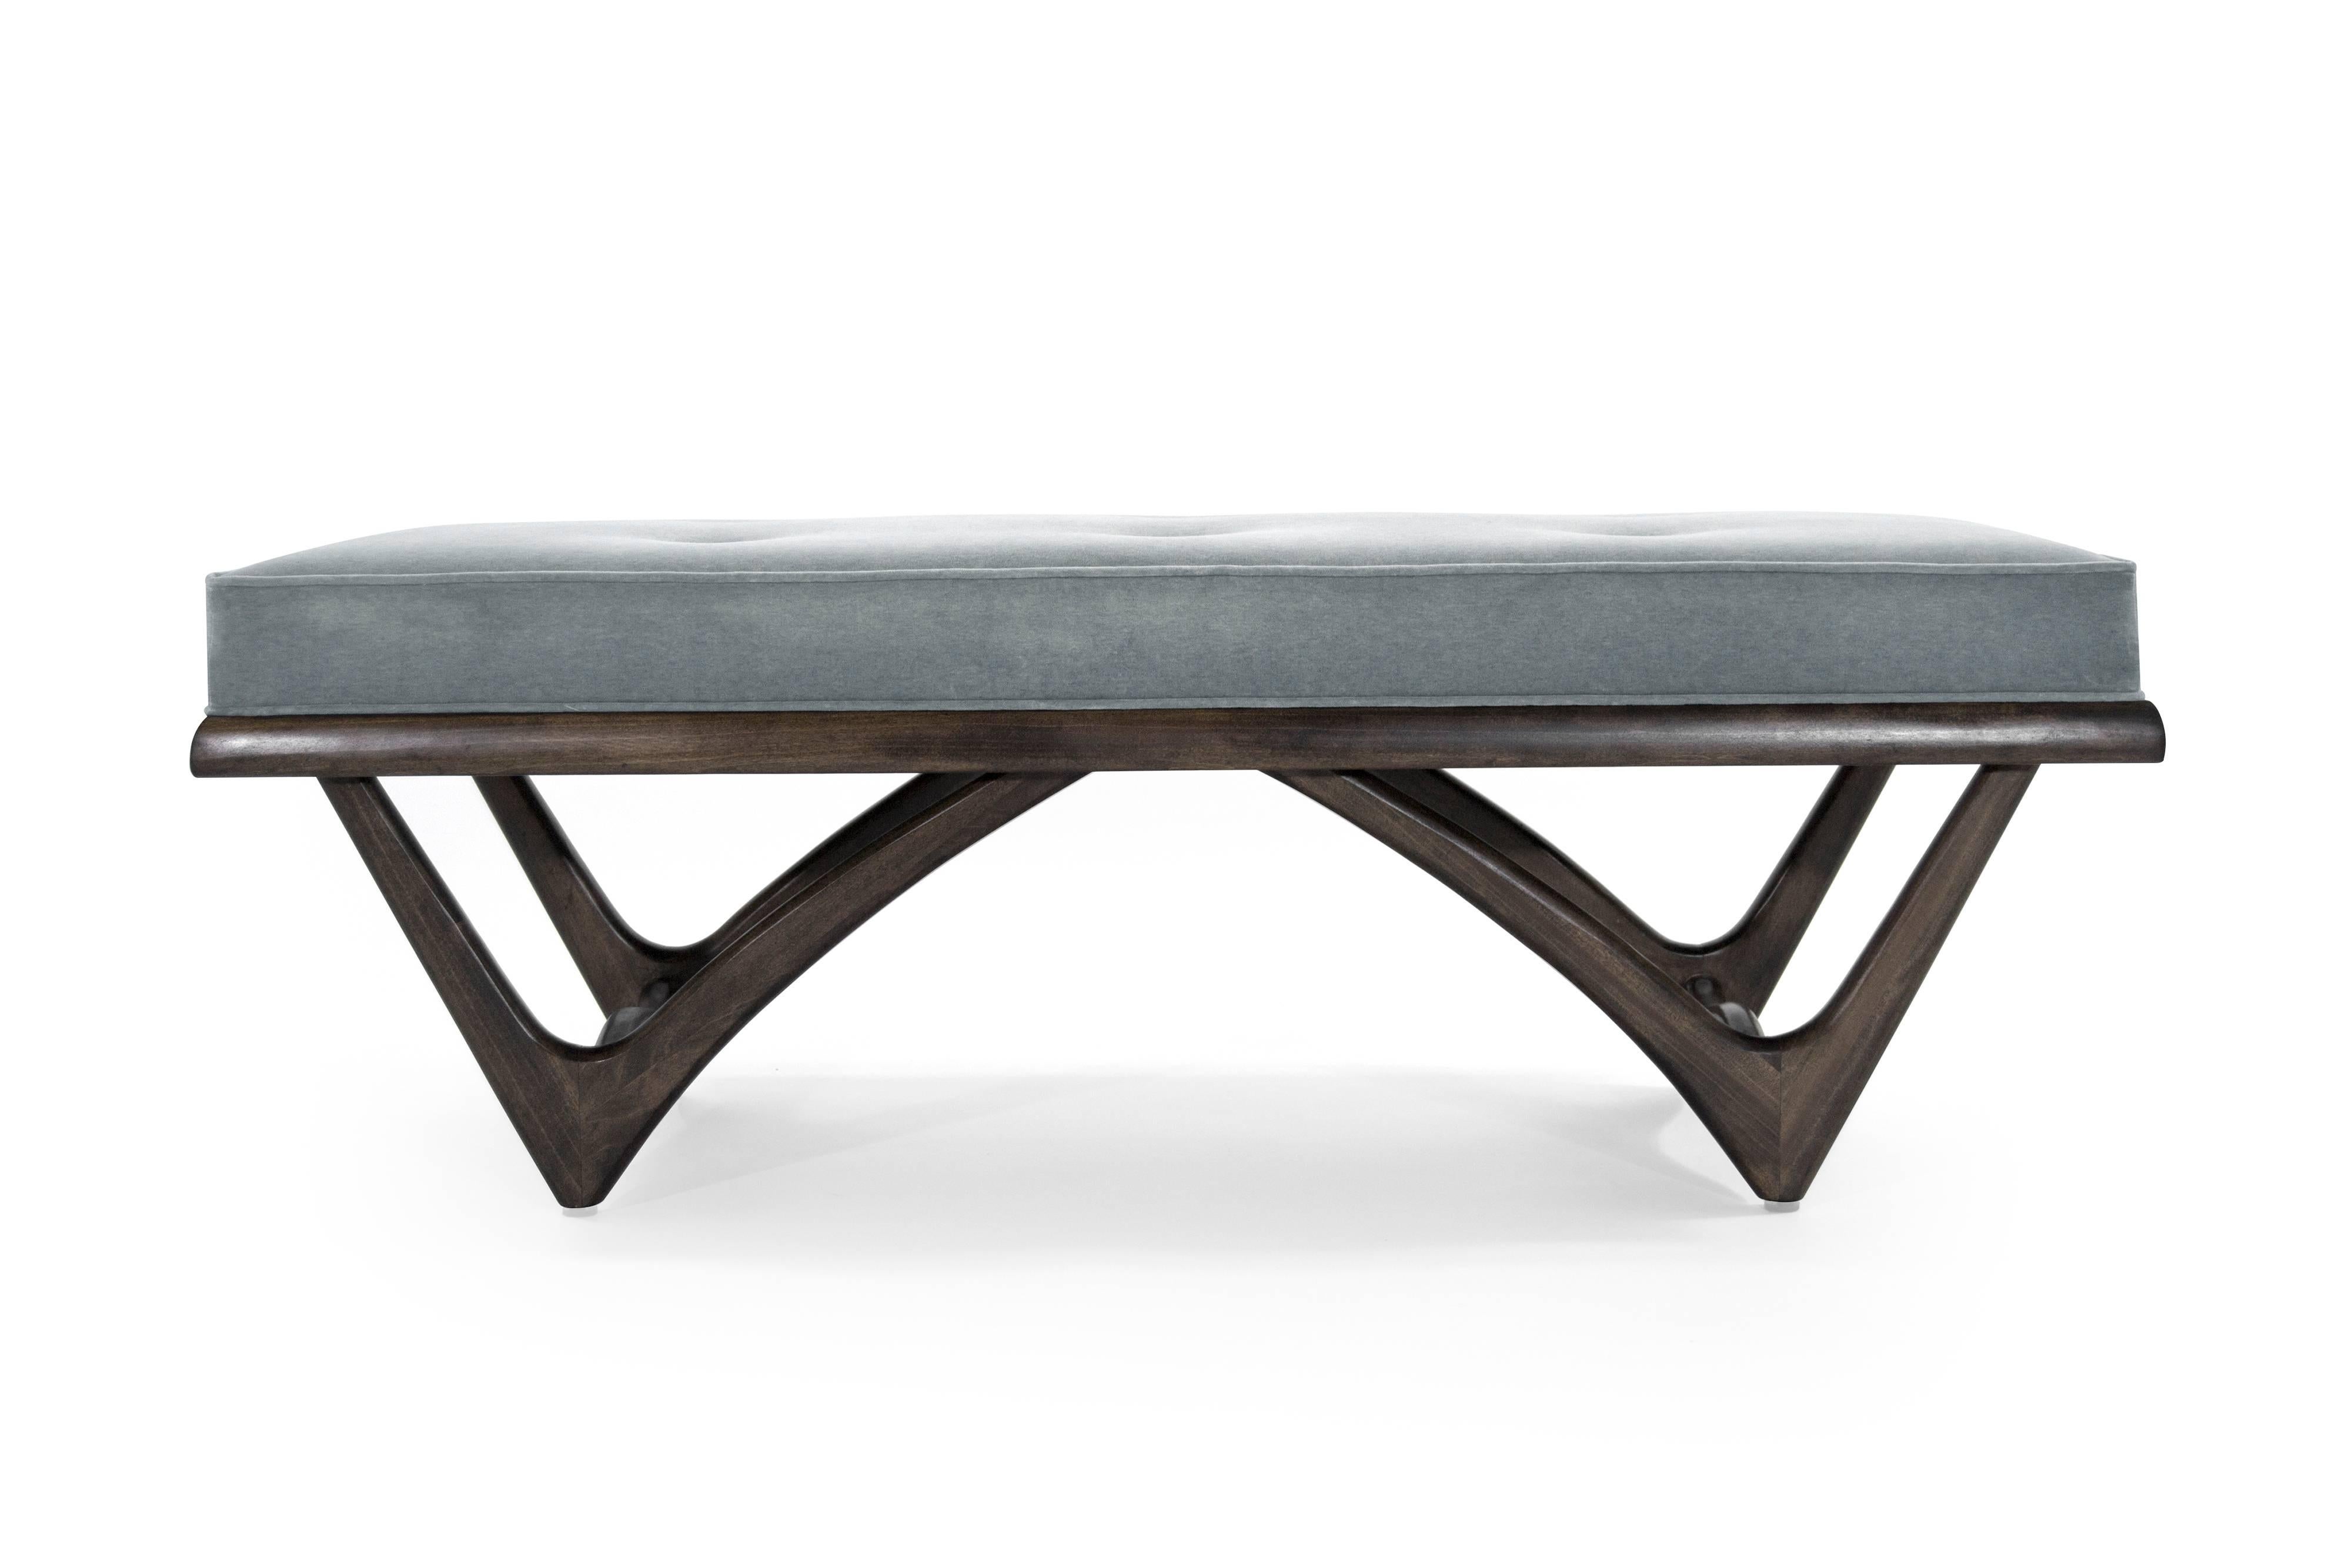 Mid-Century Modern bench in the style of Adrian Pearsall, sculptural walnut base fully restored to it original medium walnut tone. Top newly upholstered in grey or blue velvet.